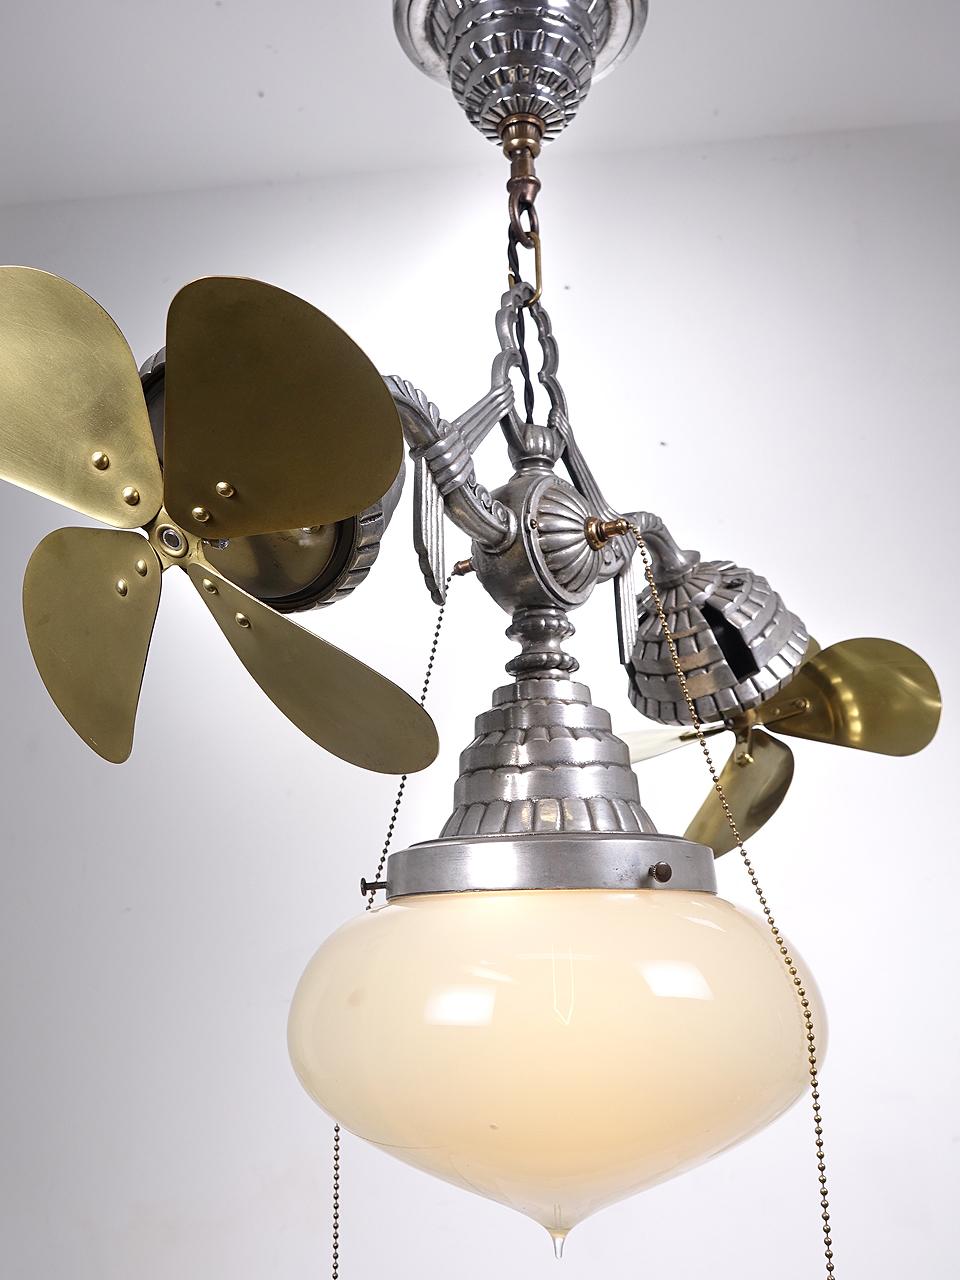 This is a high style aluminum Deco 1930s Fan-N-Lite made in Chicago. They are very rare and you may never see another example. The onion shaped globe has a large 10 inch diameter. Its hand blown Vaseline glass. The 2 four blade brass fans also have